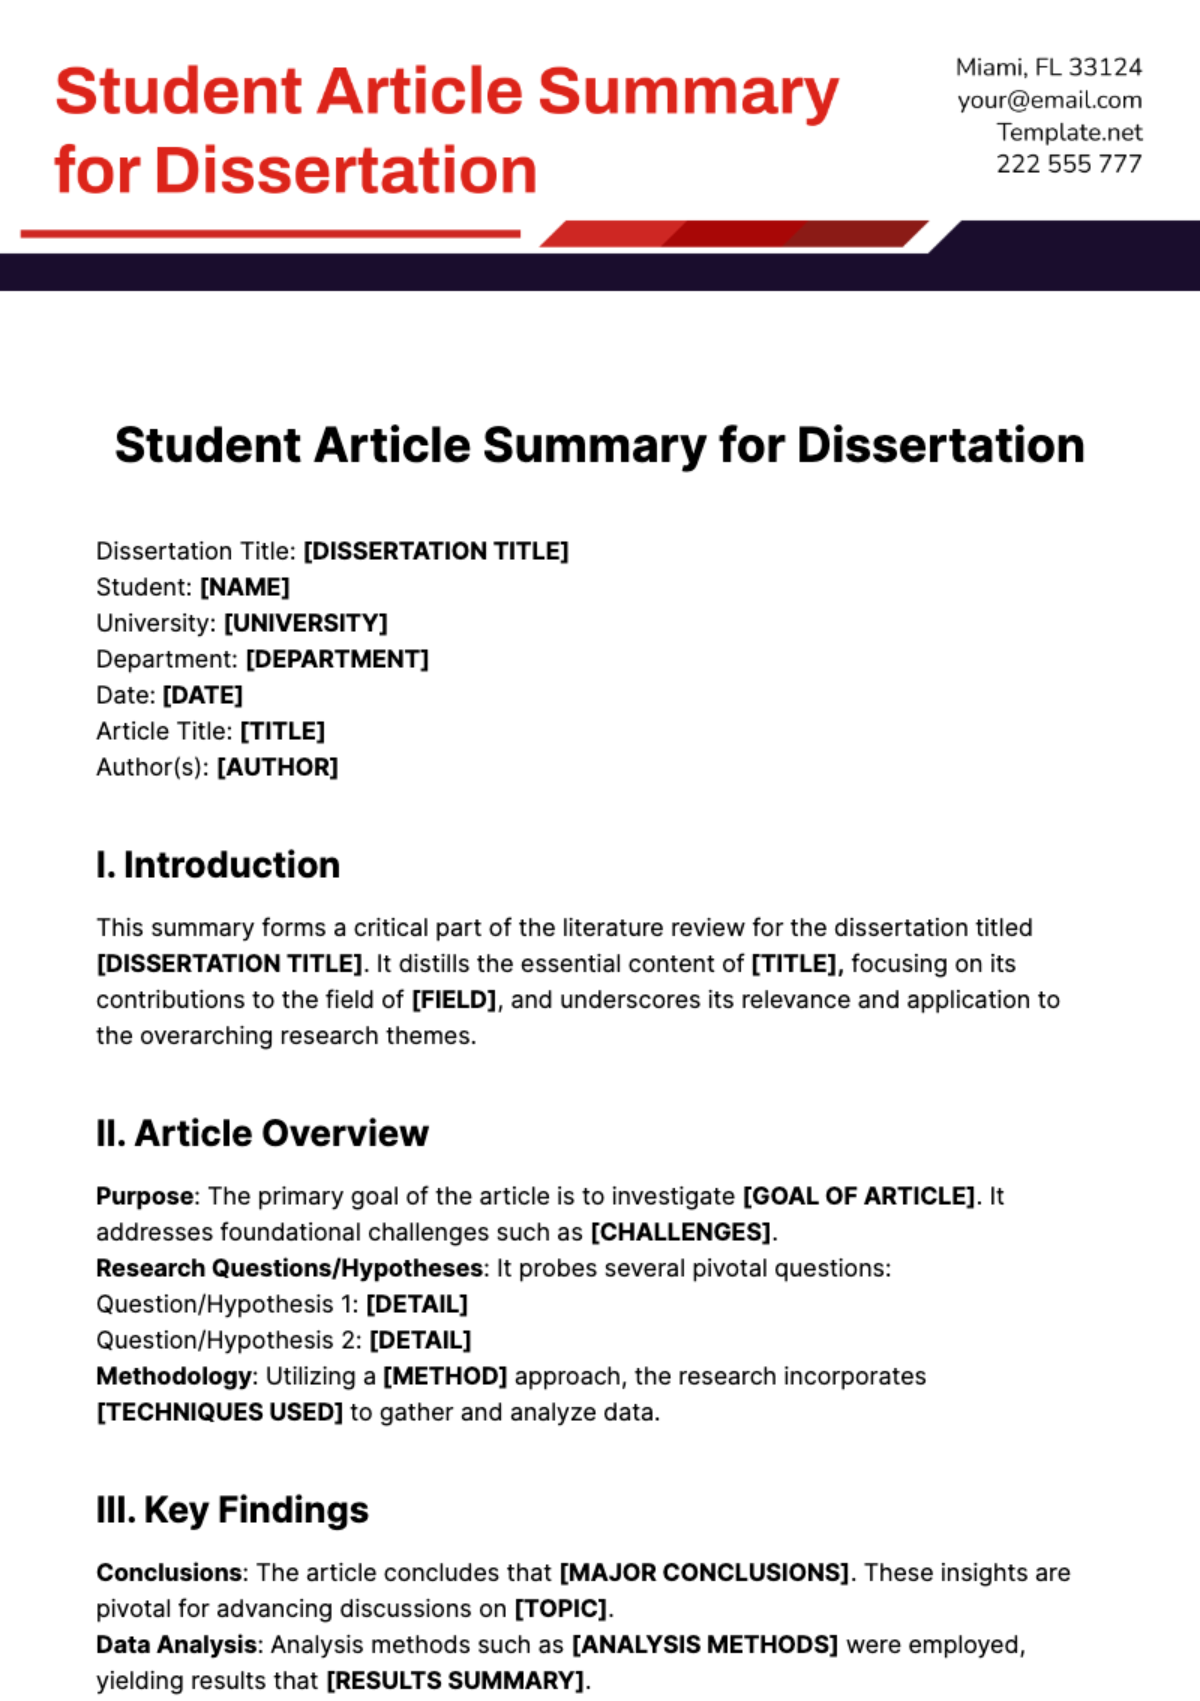 Student Article Summary for Dissertation Template